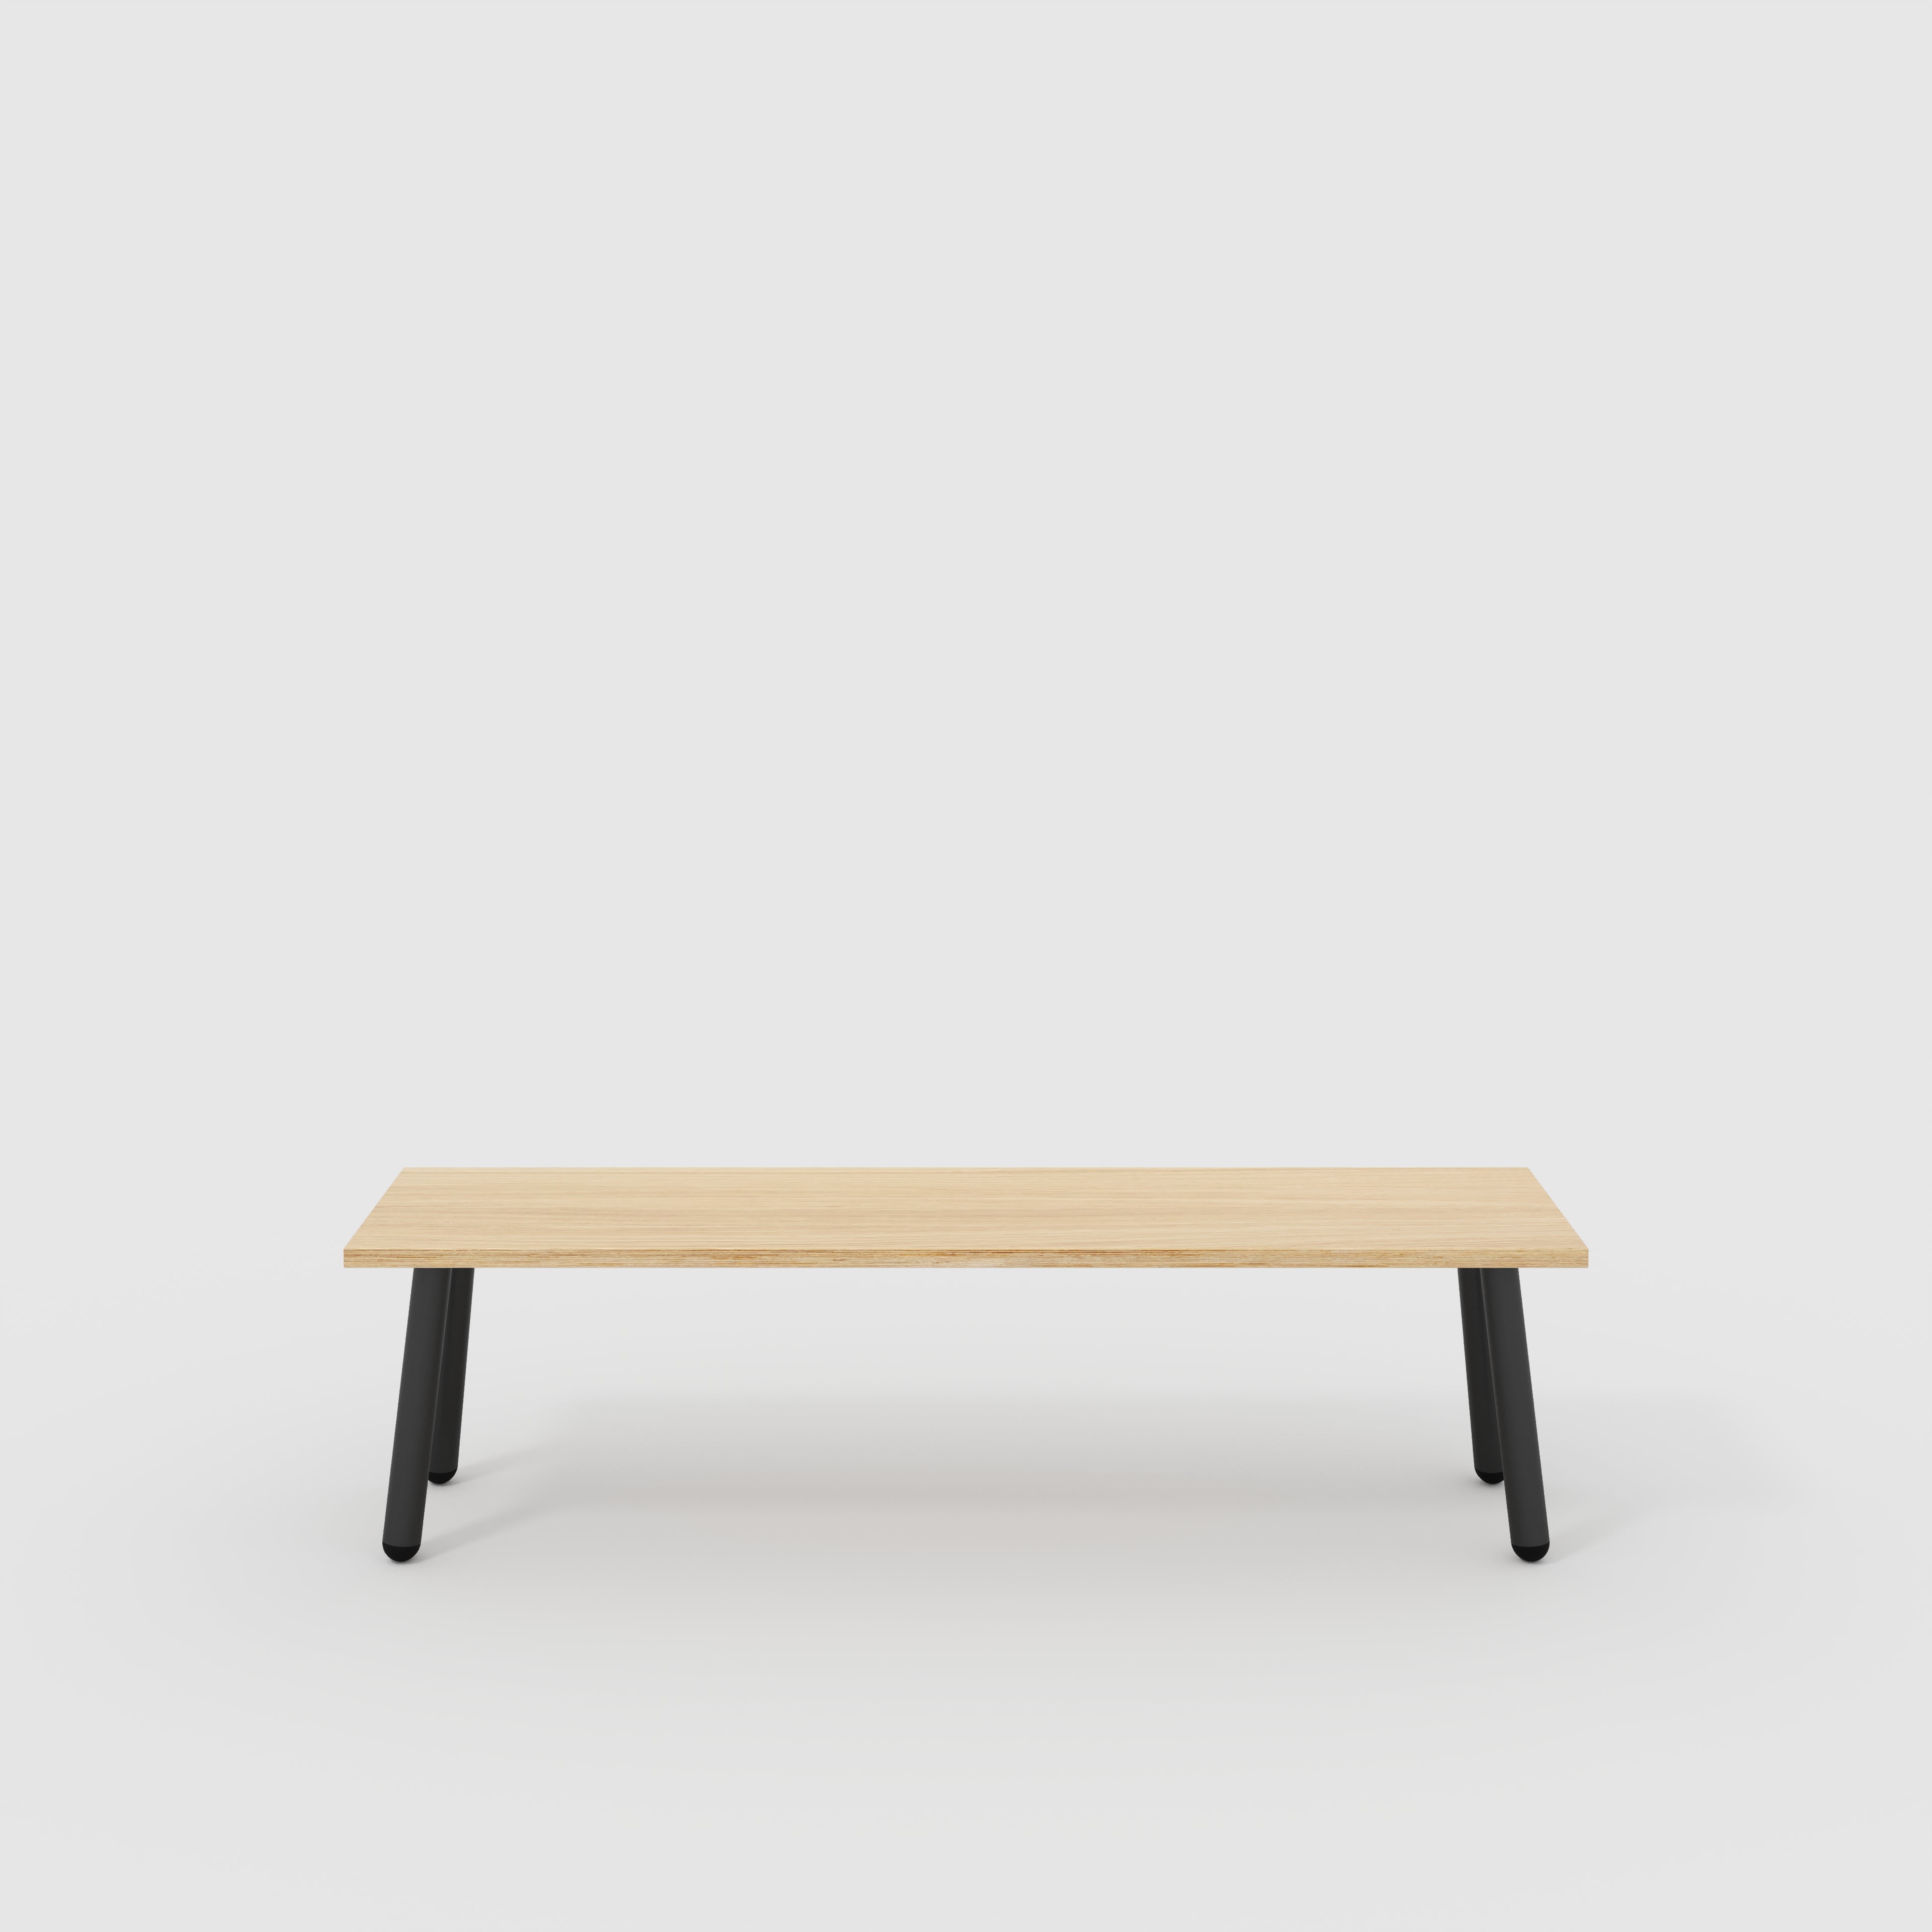 Bench Seat with Black Round Single Pin Legs - Plywood Oak - 1600(w) x 400(d)